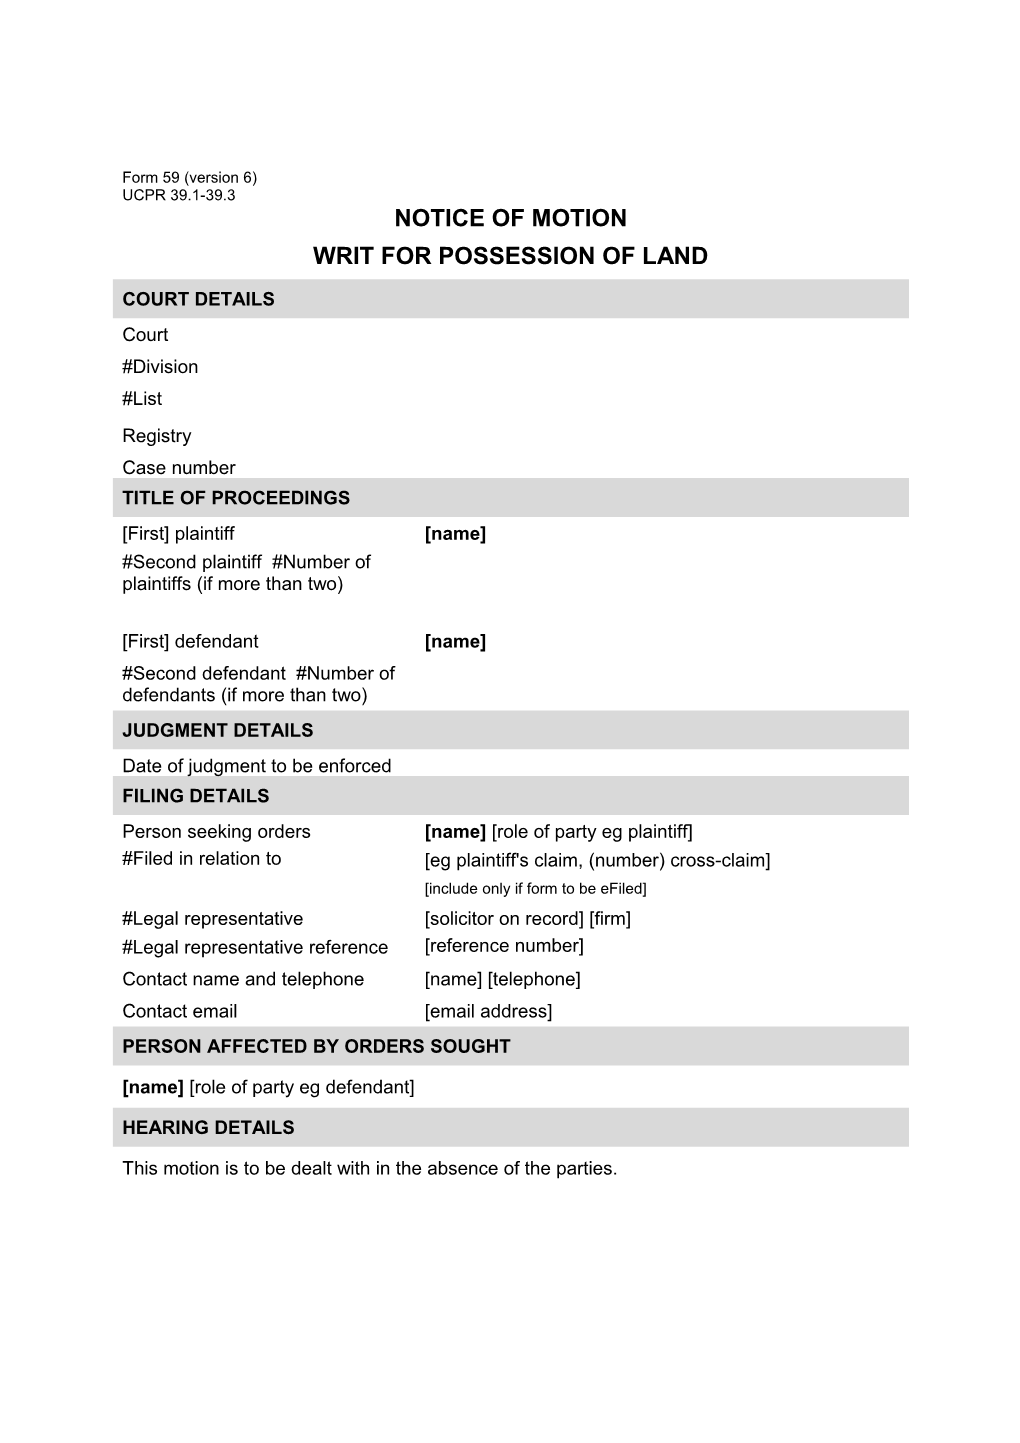 Form 59 - Notice of Motion Writ for Possession of Land